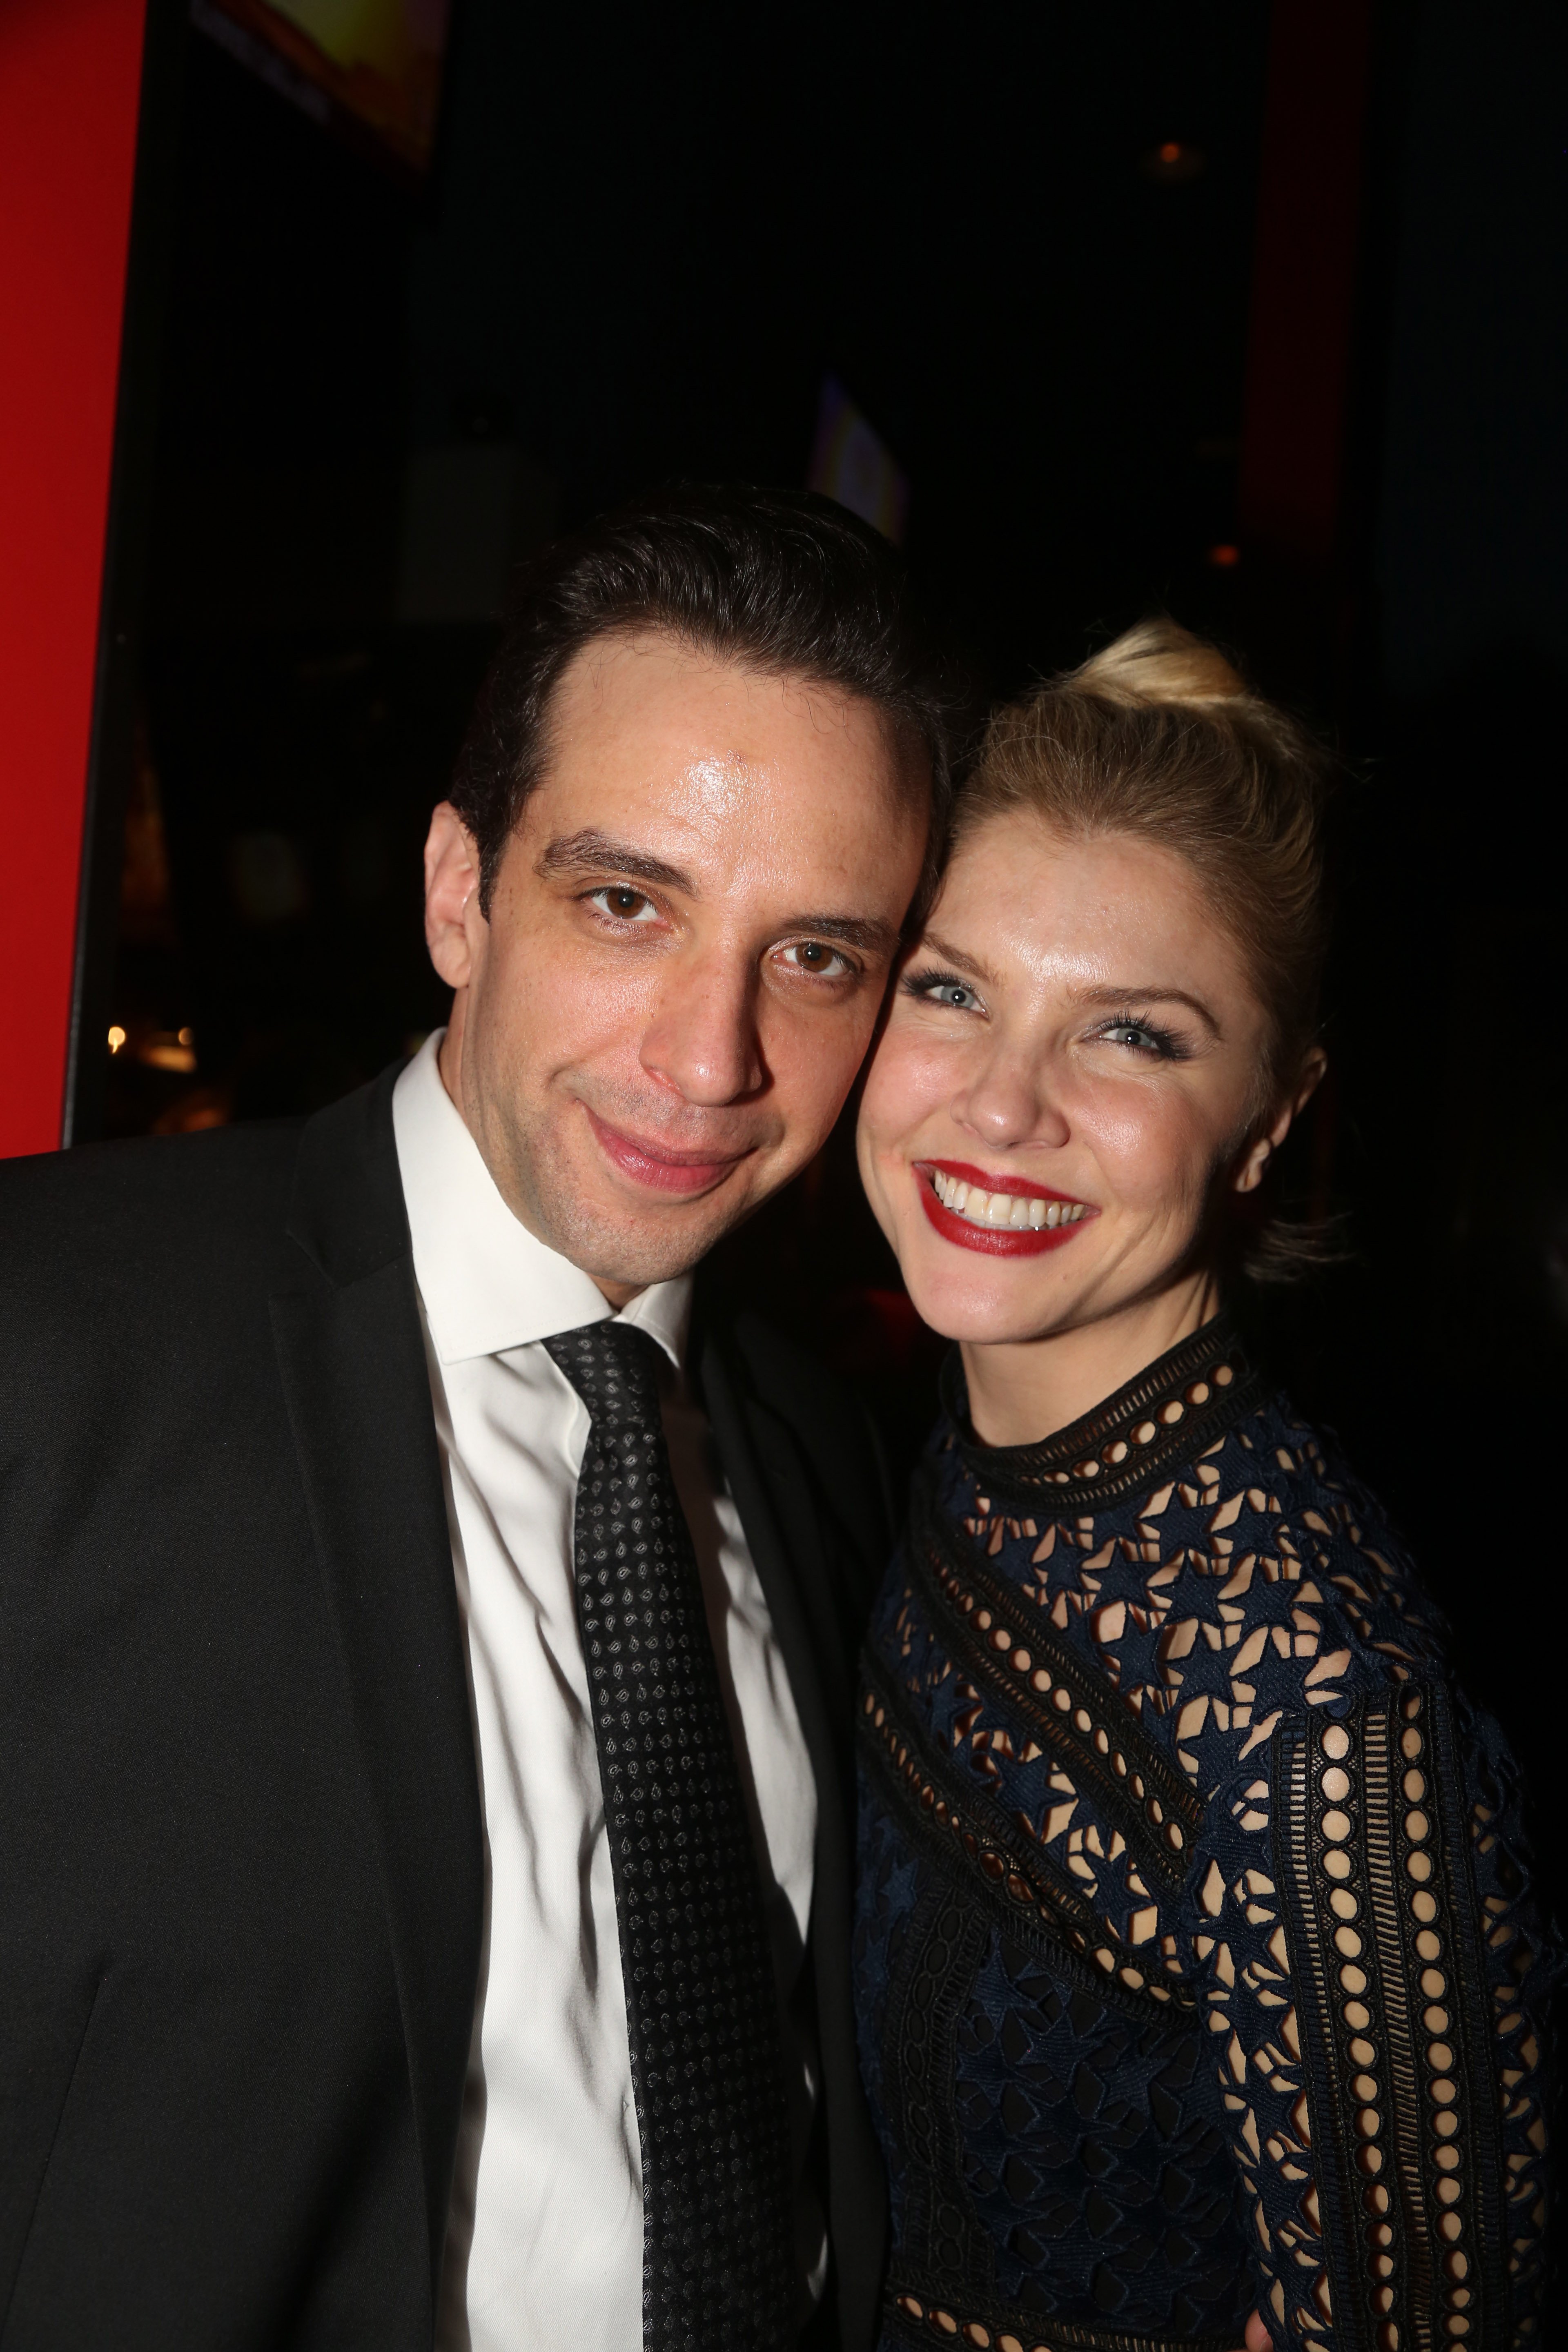 Nick Cordero and Amanda Kloots pose at the after party for the Broadway series "Crazy For You" on February 19, 2017, in New York City. | Source: Getty Images.